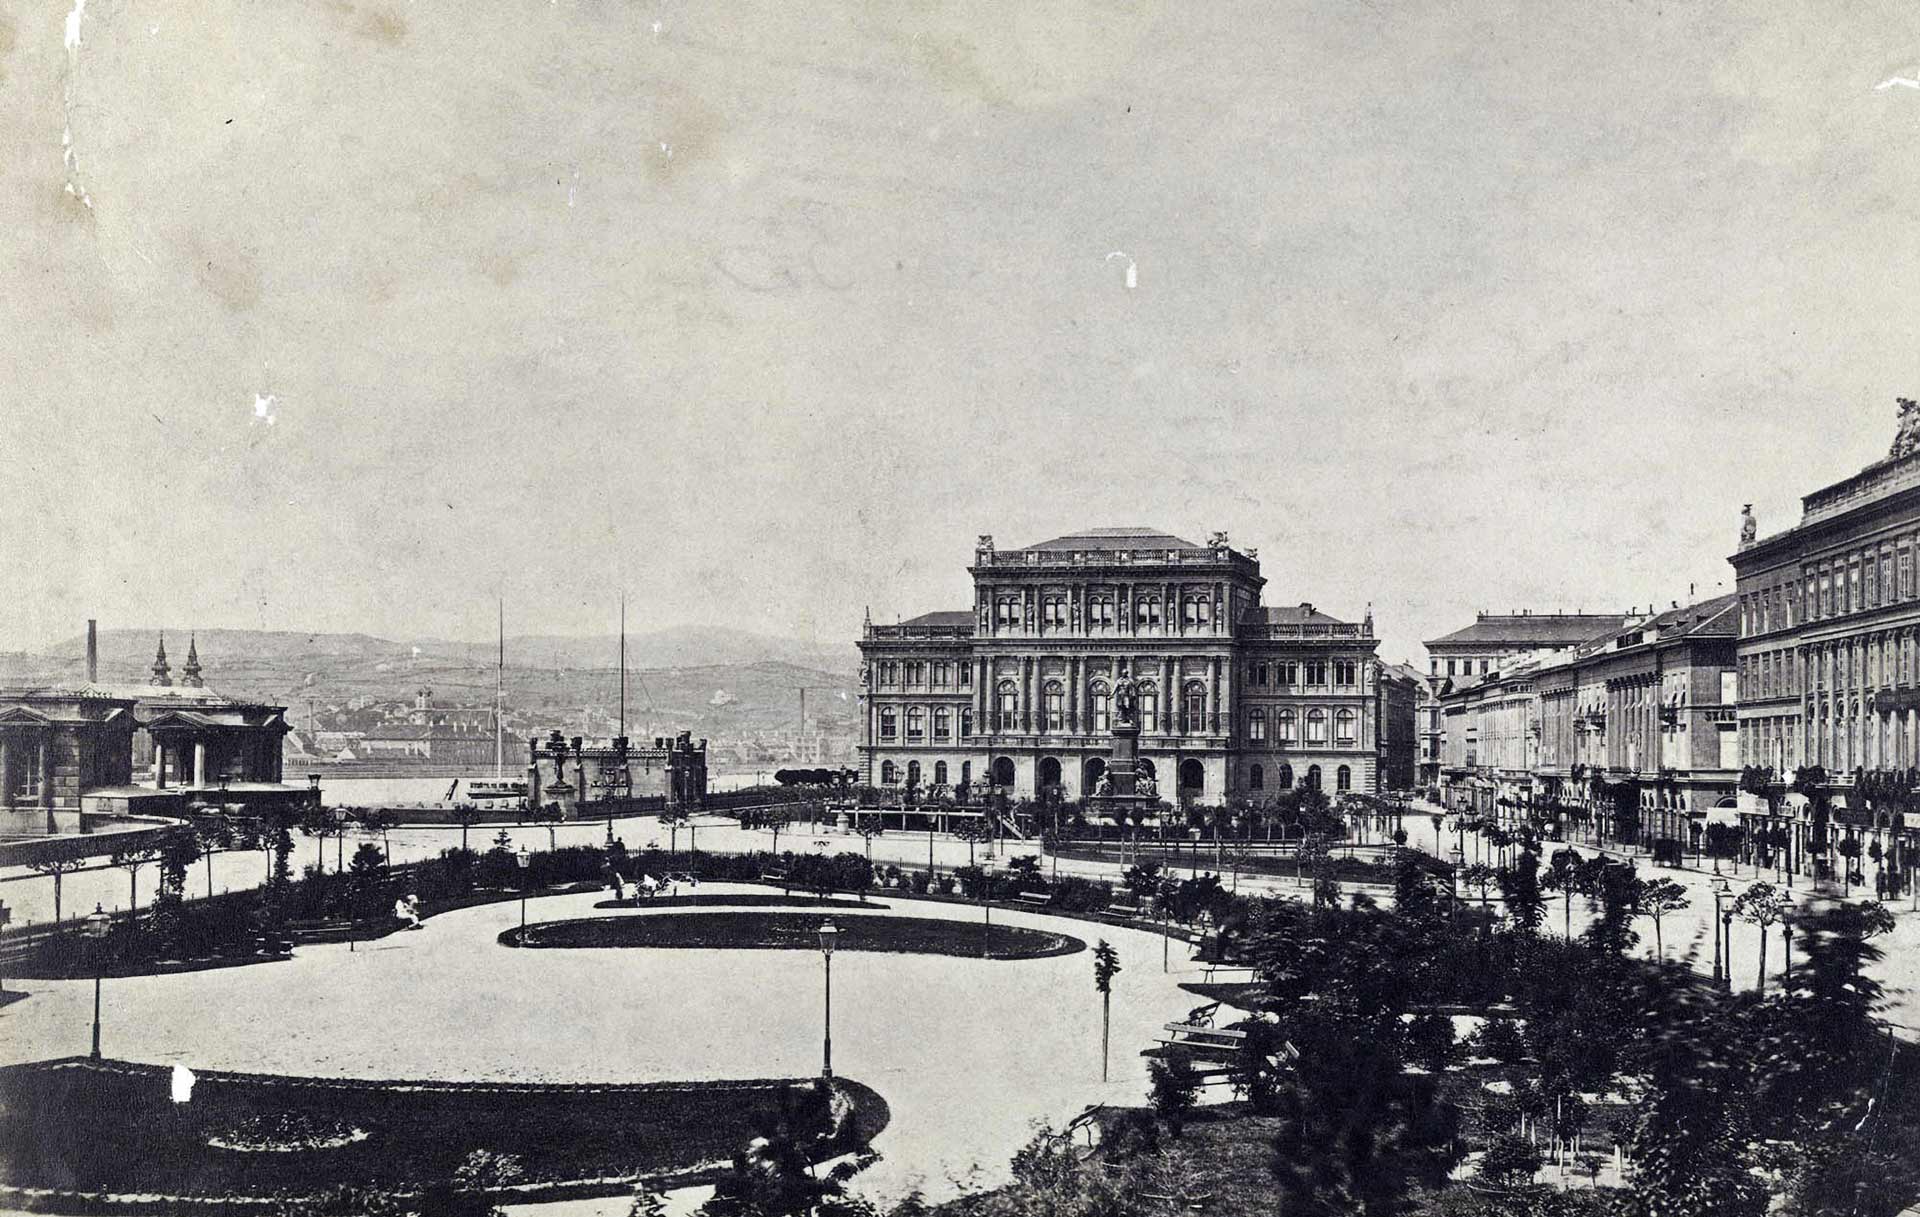 István Széchenyi (Ferenc József) square, opposite the Hungarian Academy of Sciences. The photo was made between 1880-1890 (source: Fortepan / Budapest City Archives / Photos of György Klösz)